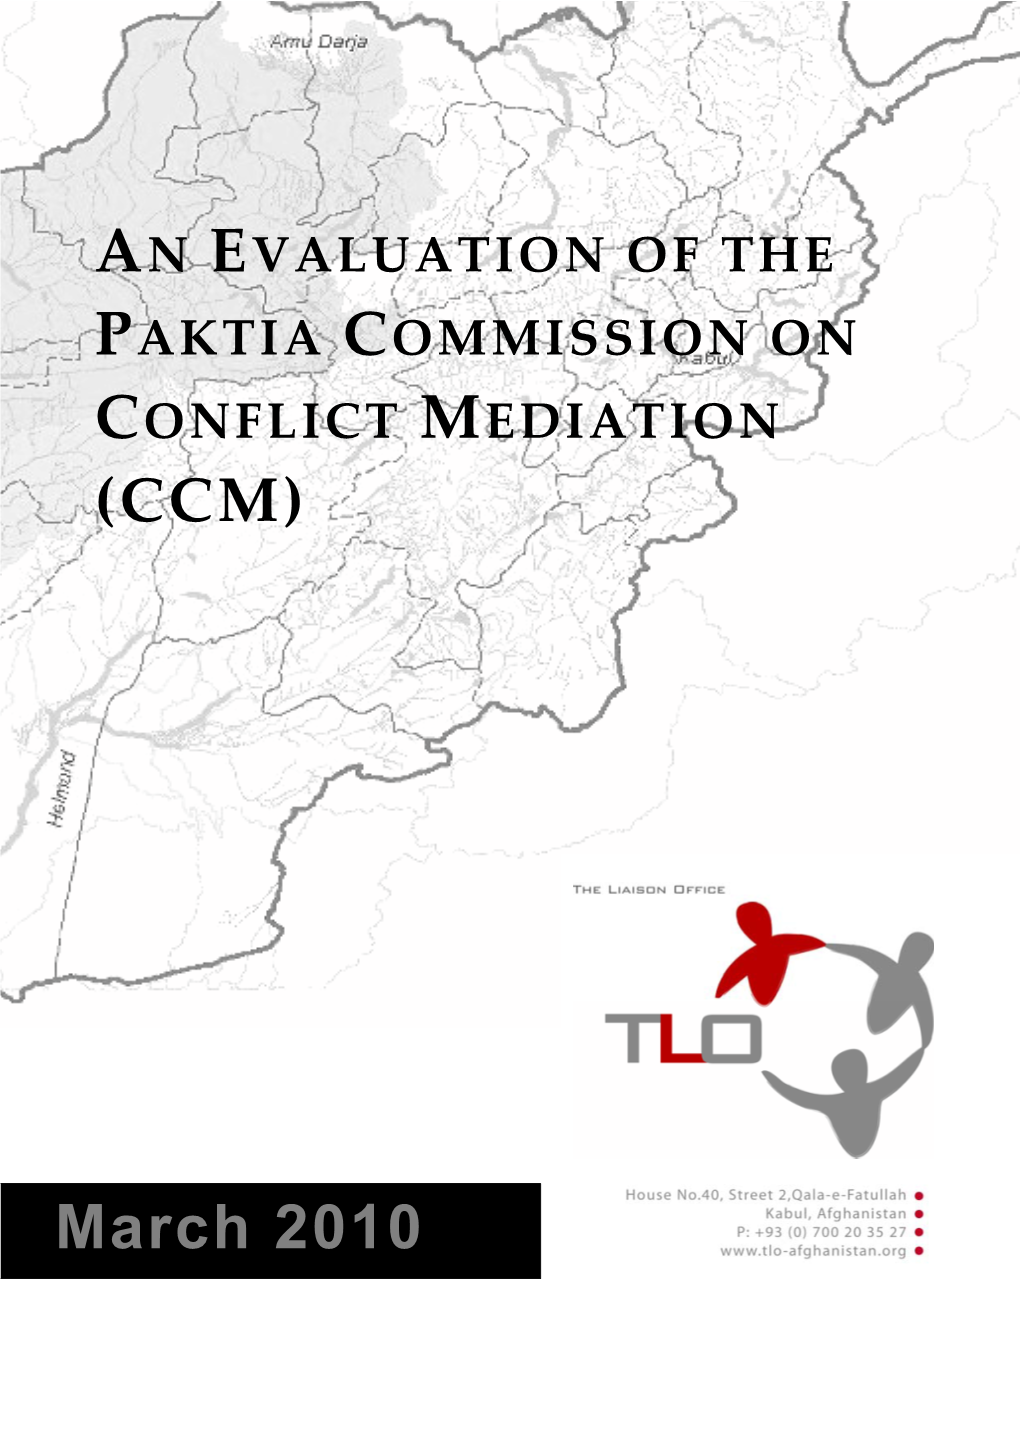 Evaluation of the Paktia Commission on Conflict Mediation (Ccm)